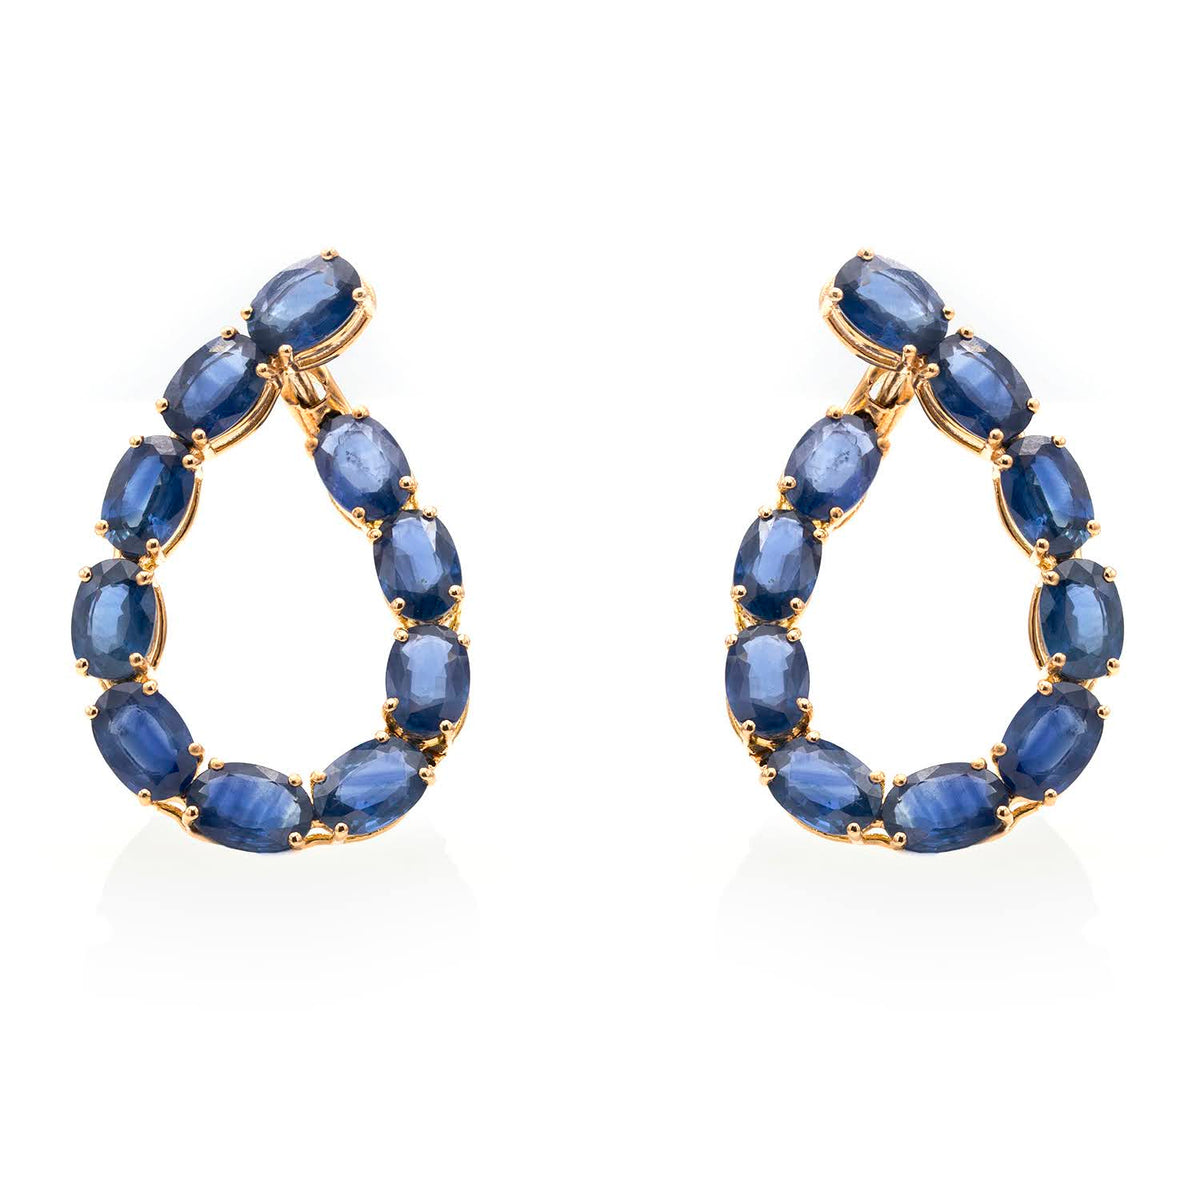 Oval Sapphire 10.82ct Earrings – Paris Collection